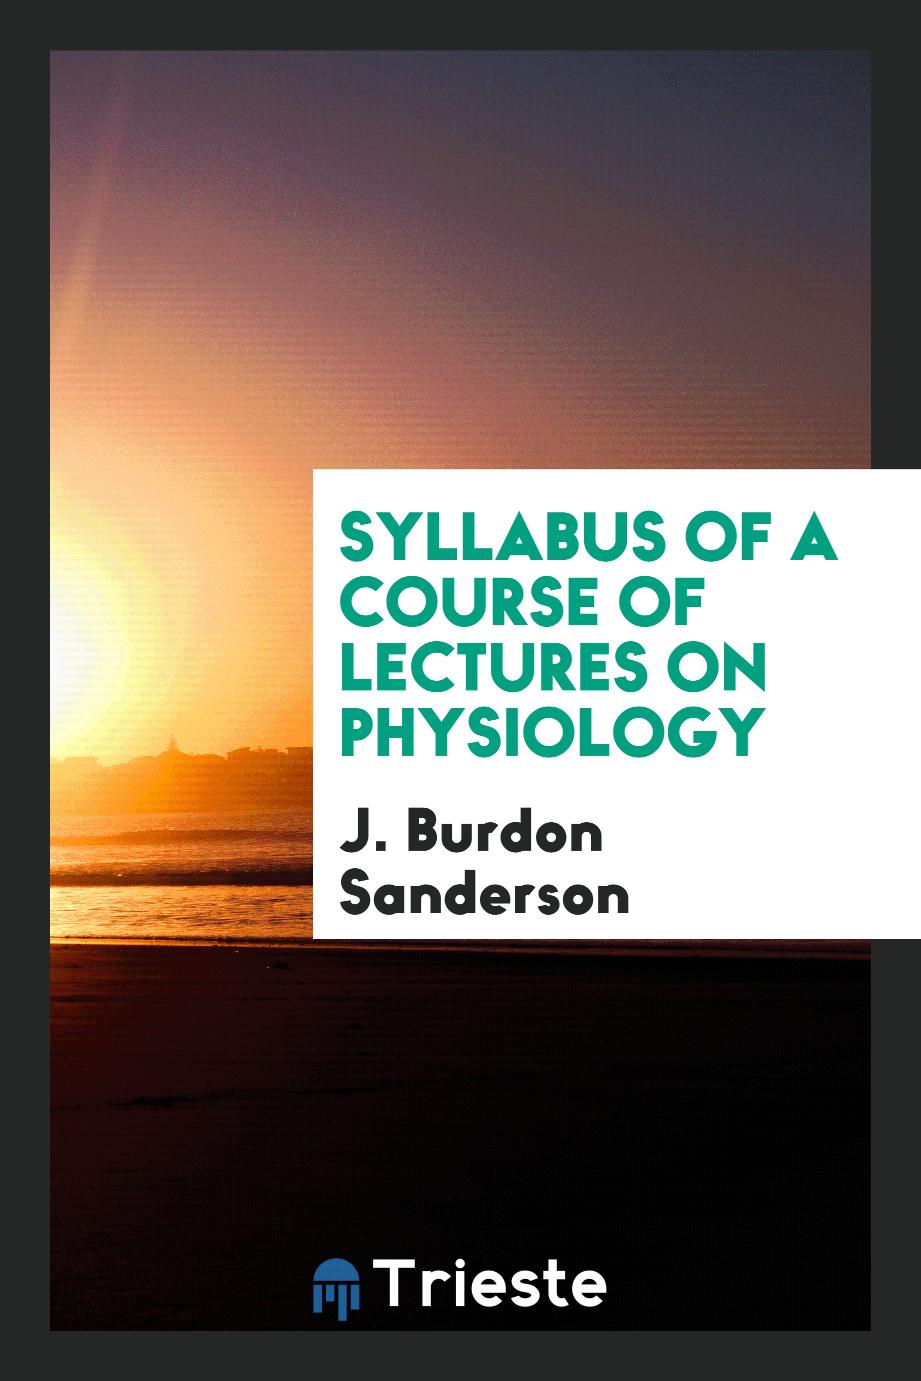 Syllabus of a Course of Lectures on Physiology